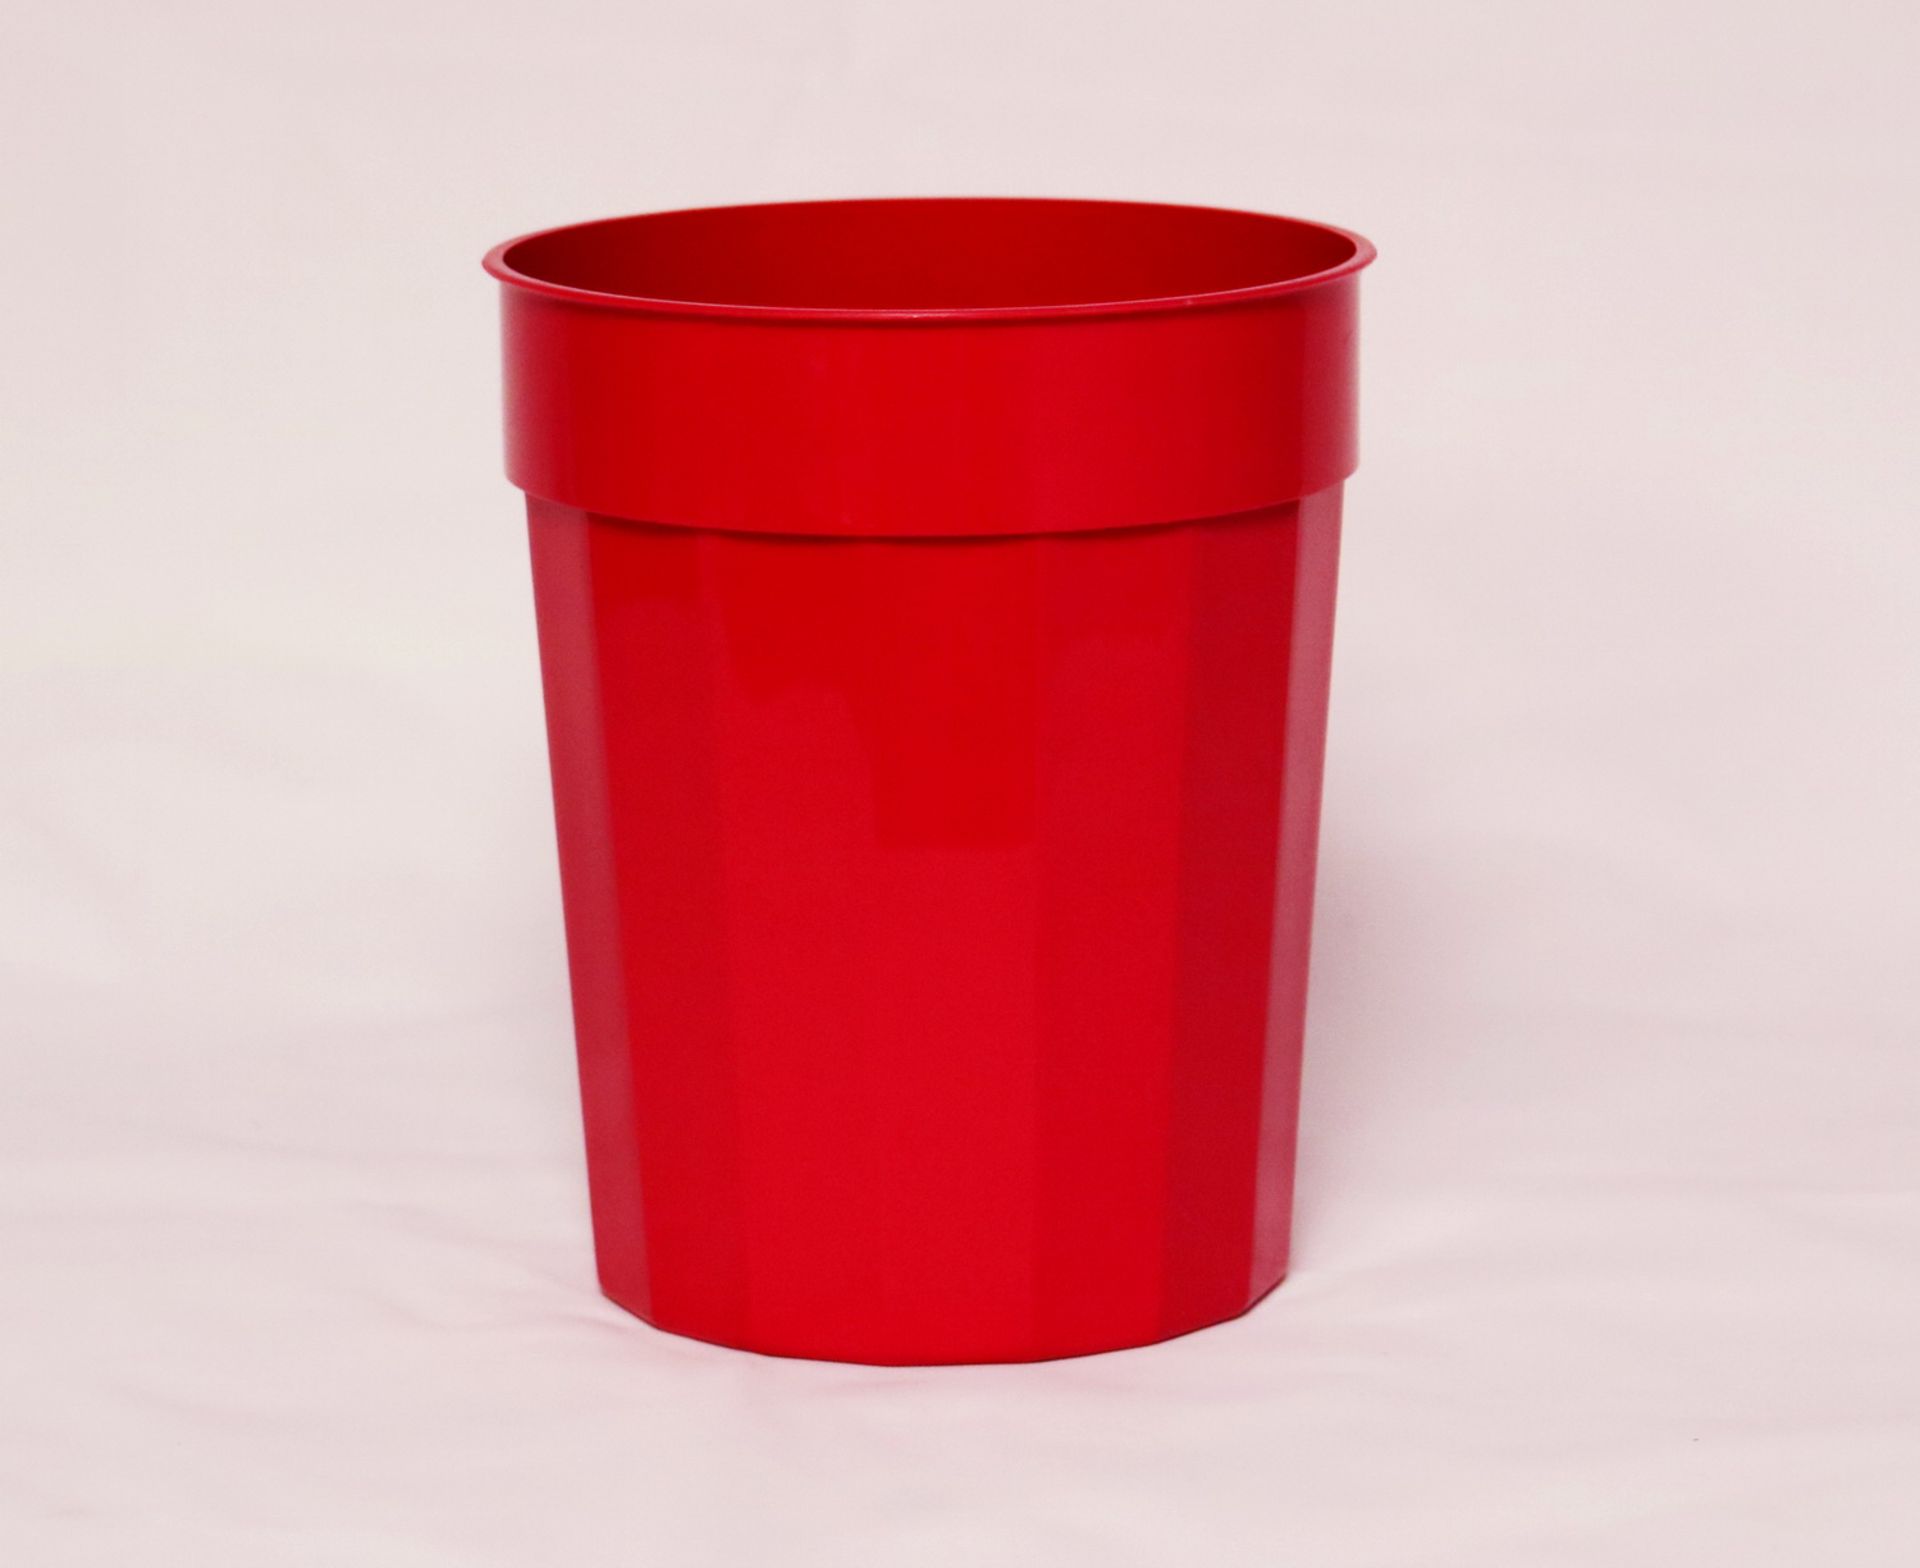 22oz Drink Cup Mold - Image 13 of 13